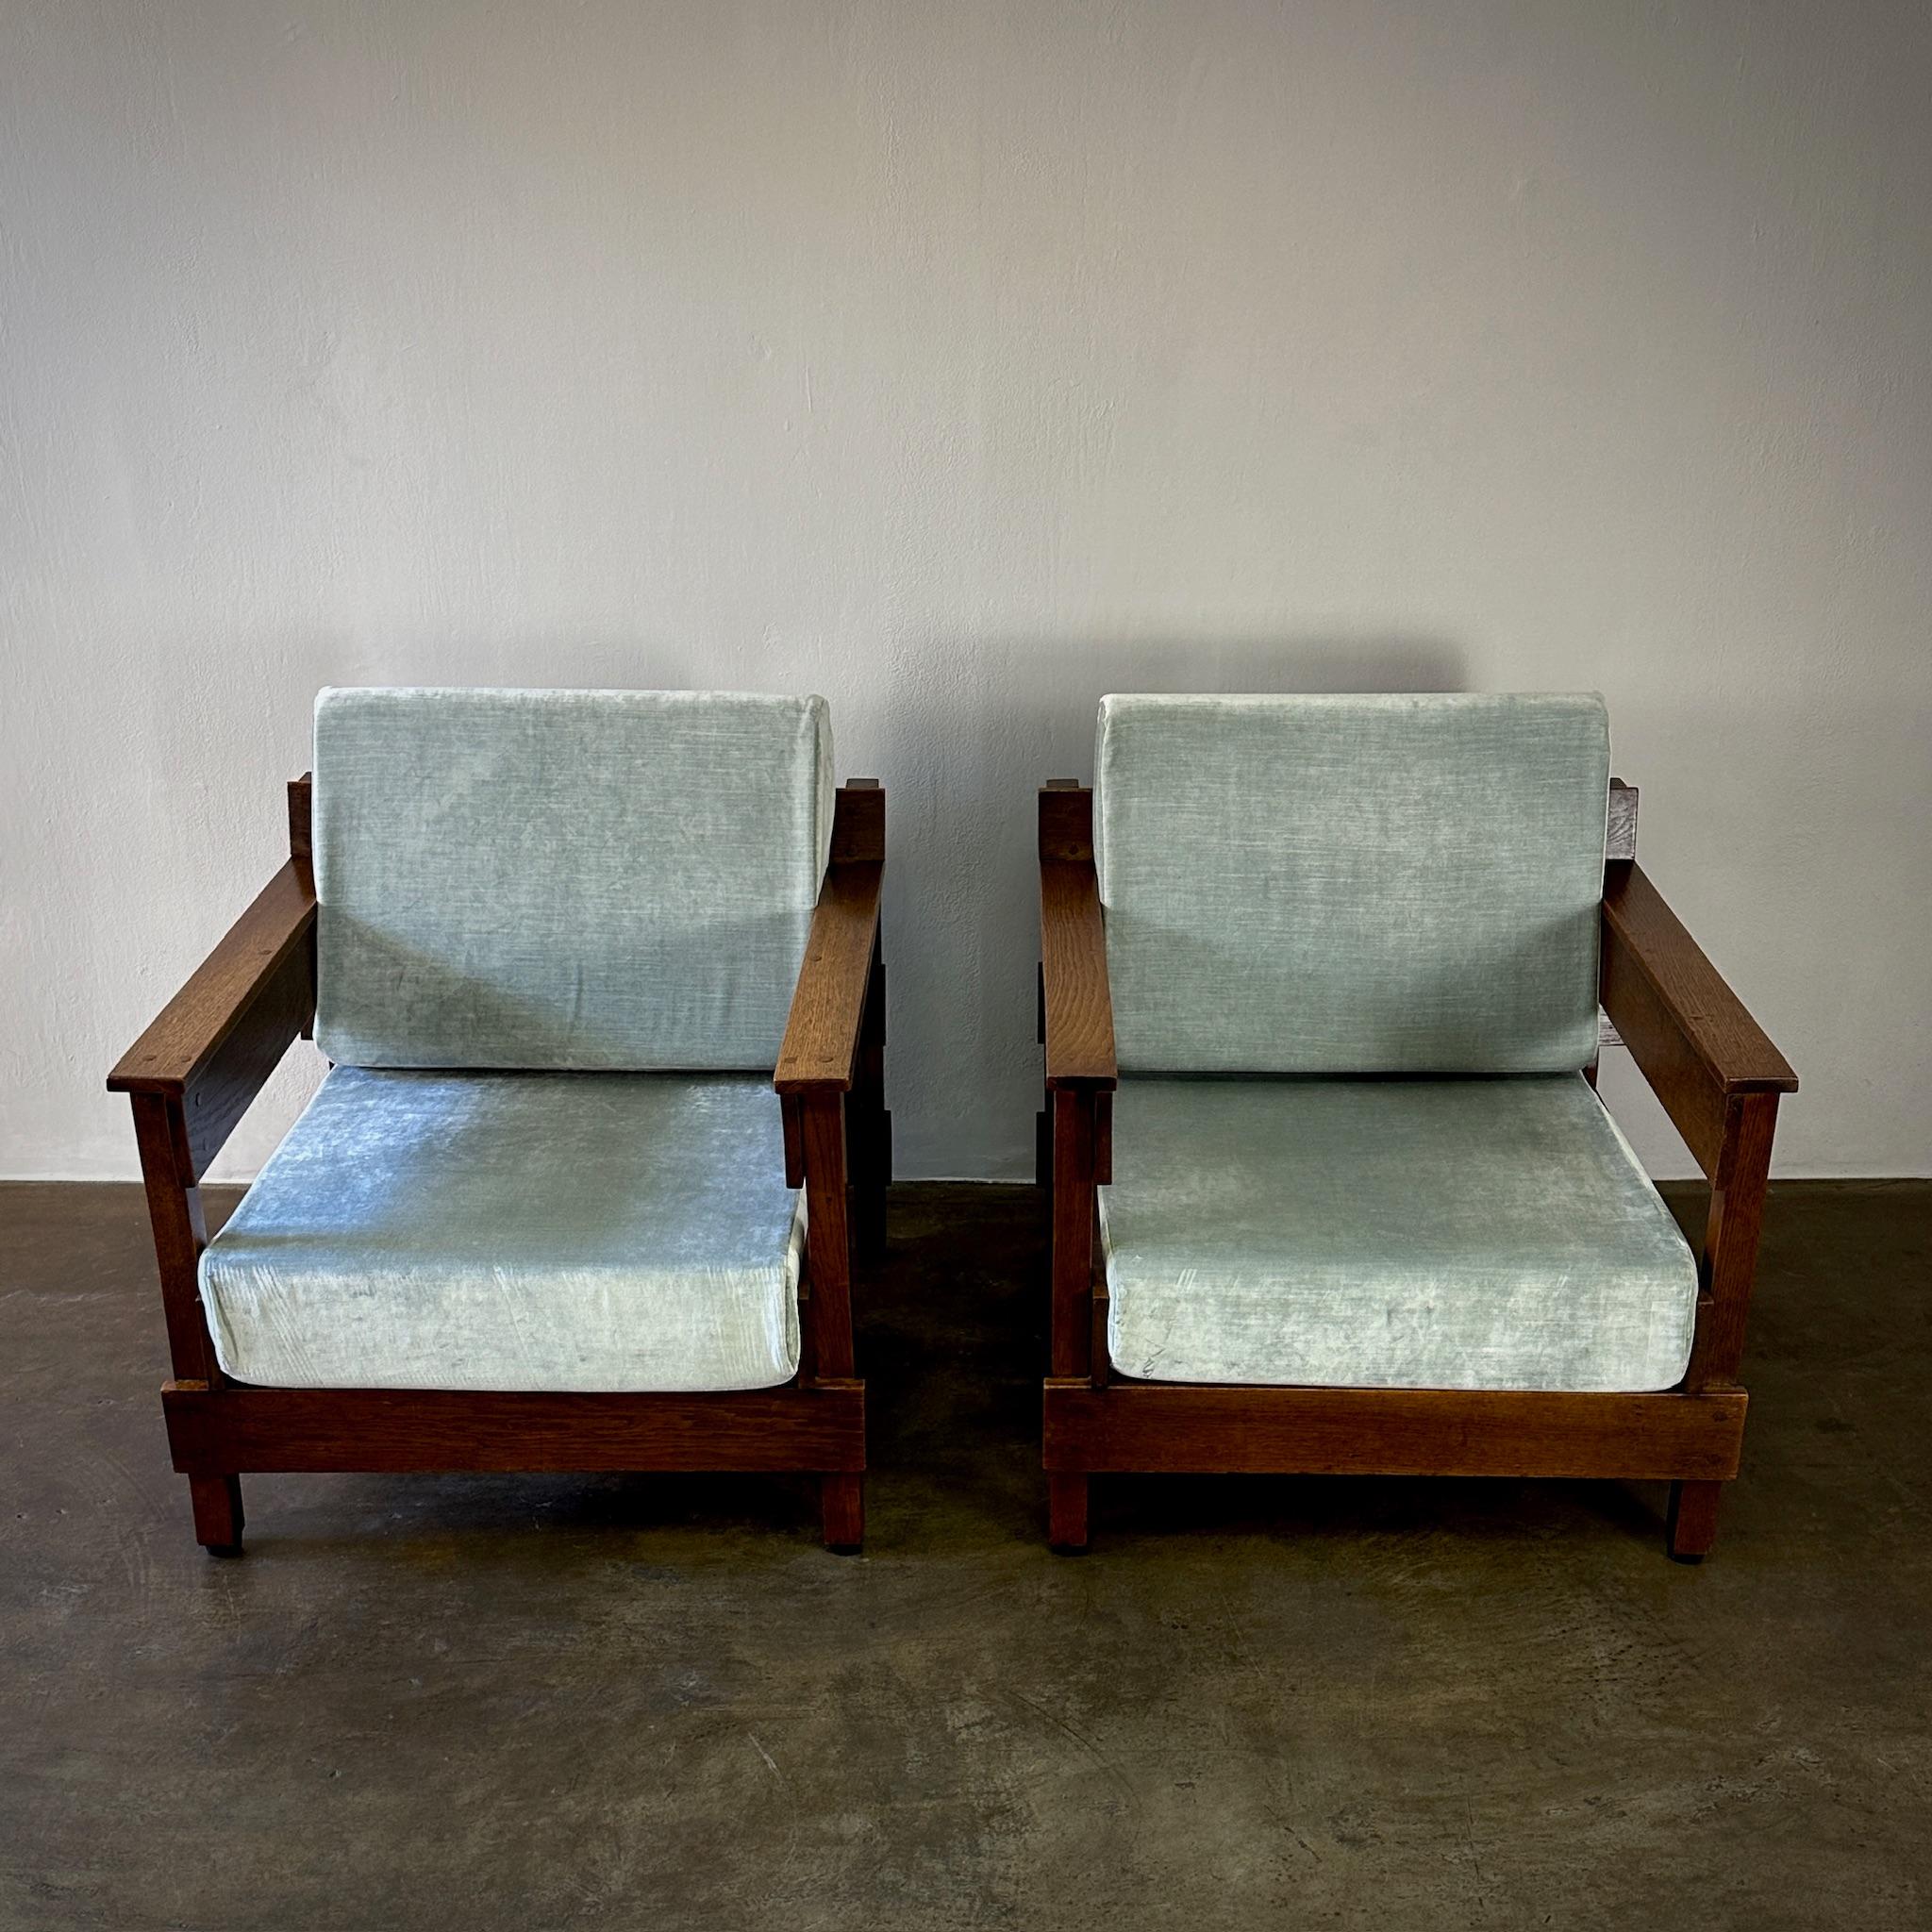 Pair of large Dutch 1940s lounge chairs with architectural modernist wood frameworks celadon velvet upholstered cushions. Nostalgic yet forward facing.
Netherlands, circa 1940
Dimensions: 32.5W x 35D x 26.5H (seat height 17)